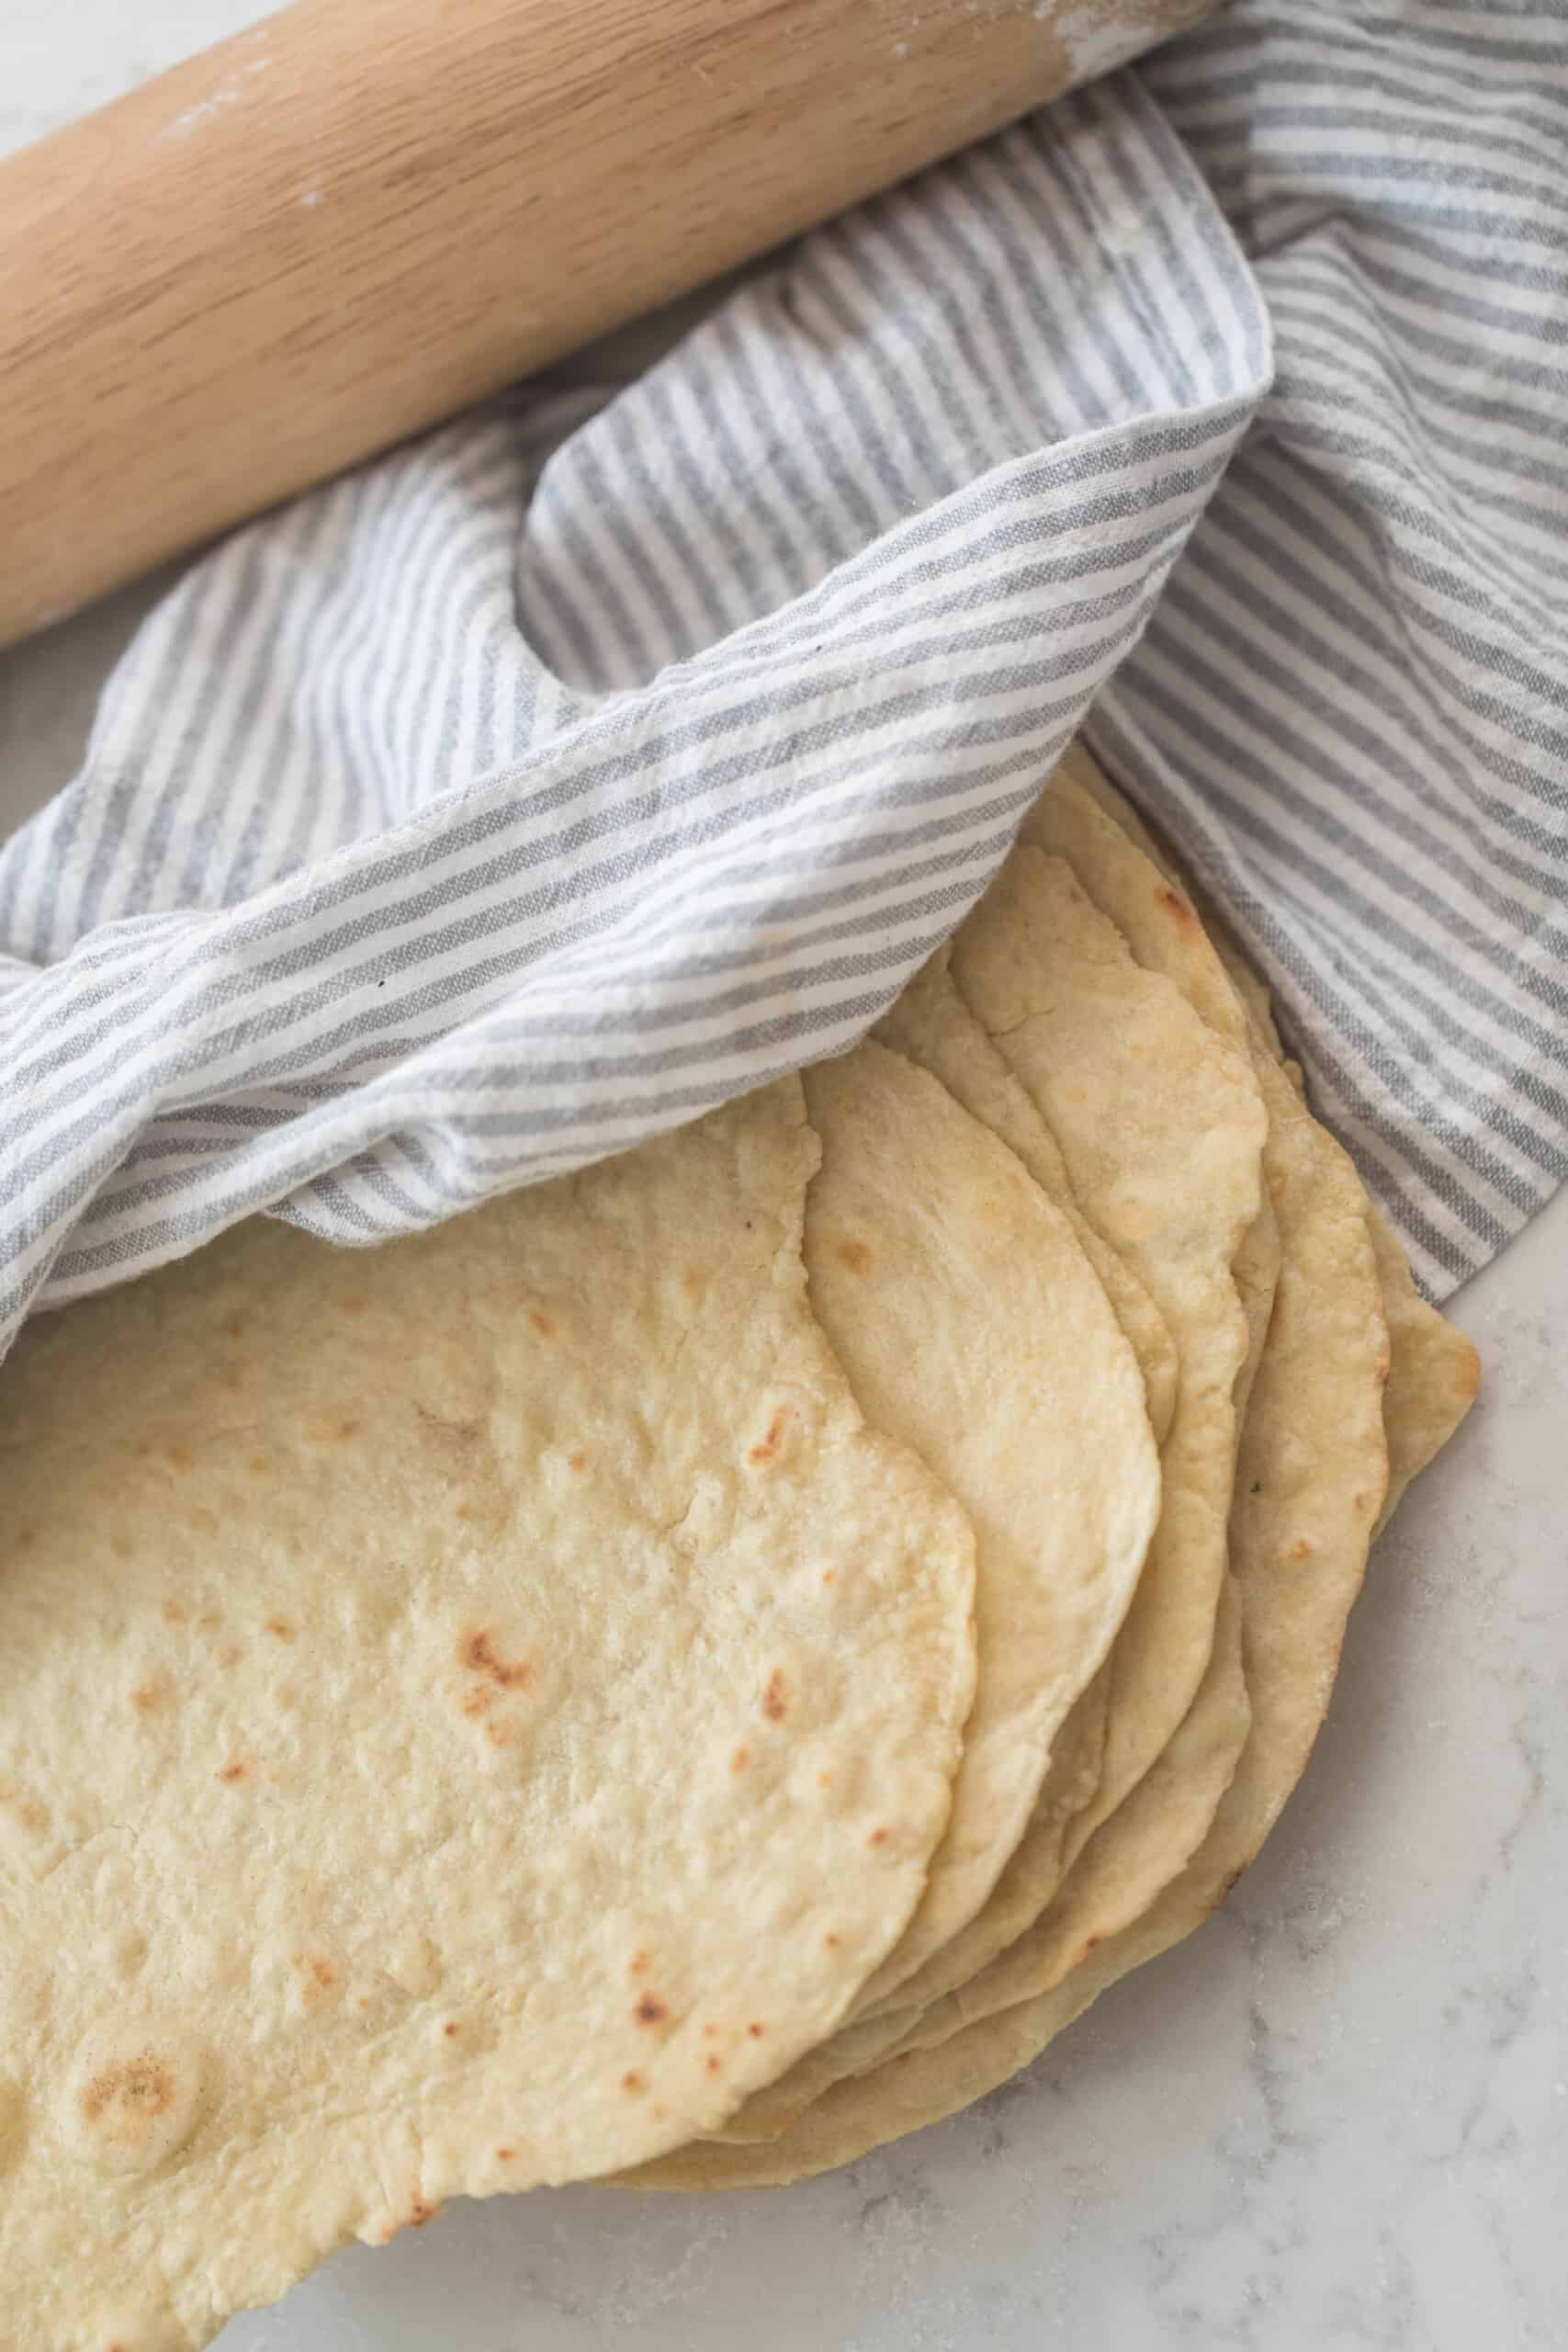 homemade einkorn tortillas stacked on a white quartz countertop. a gray and white towel is draped over the tortillas and a rolling pin is in the background